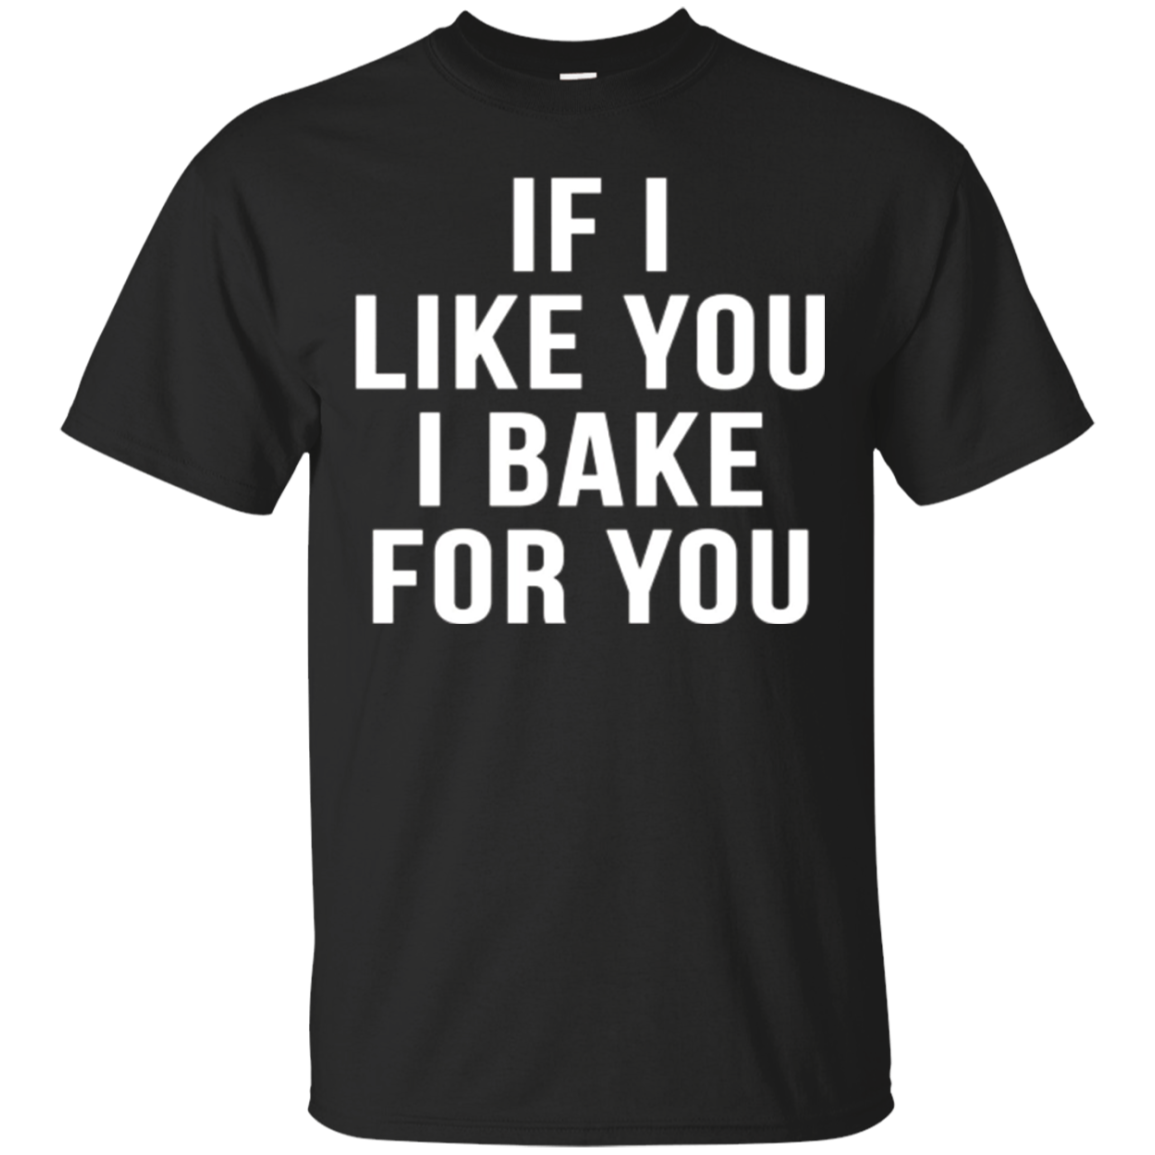 If I Like You I Bake For You Funny Cooking Baking Shirts